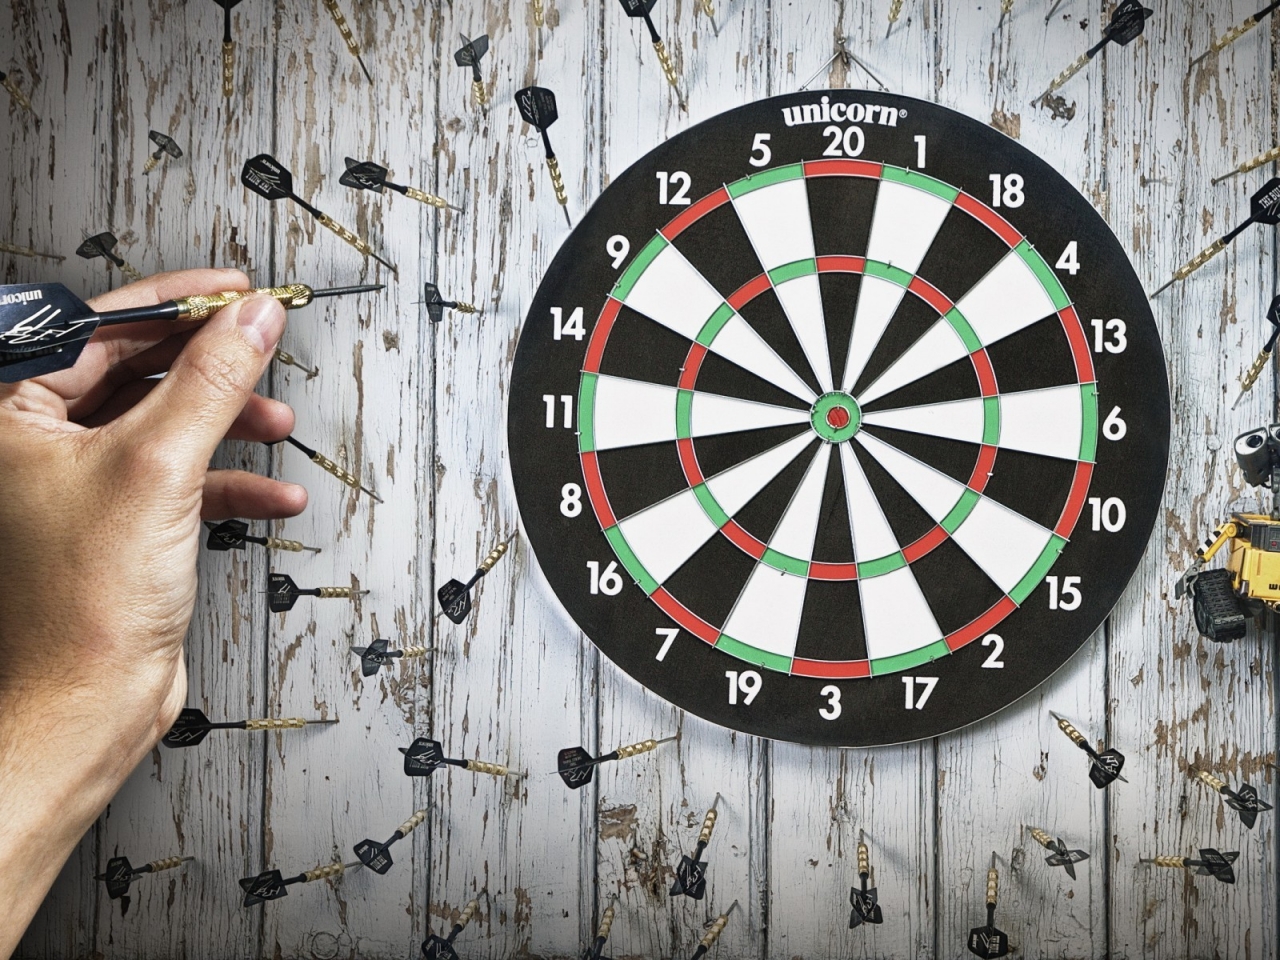 Darts Game for 1280 x 960 resolution